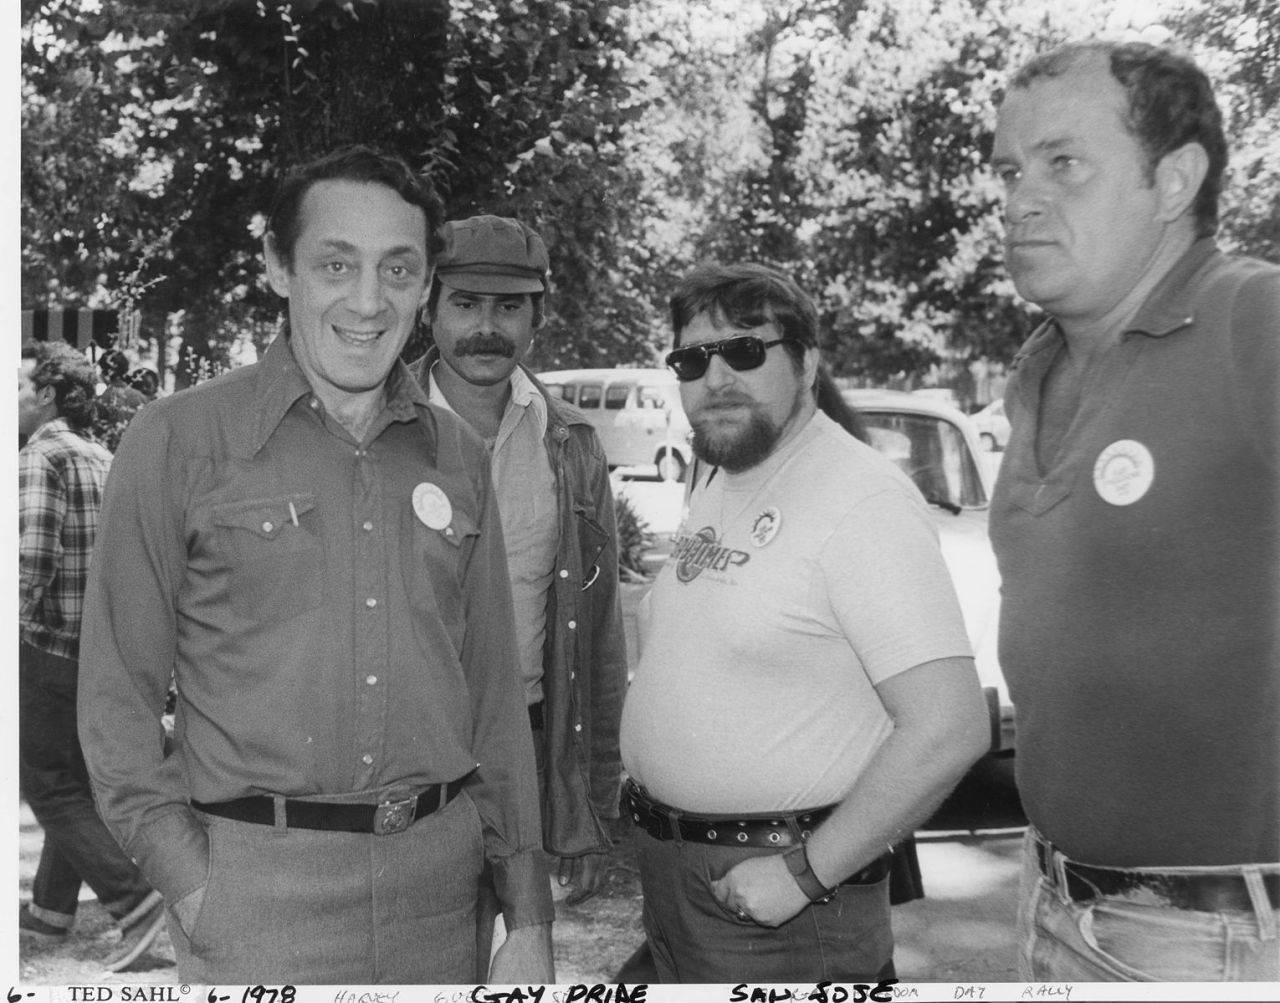 Harvey Milk, left, and three other men pictured at Gay Pride in San Jose, California in 1978. "6-1978 Harvey goes to Gay Pride San Jose."—written on sleeve holding photograph.